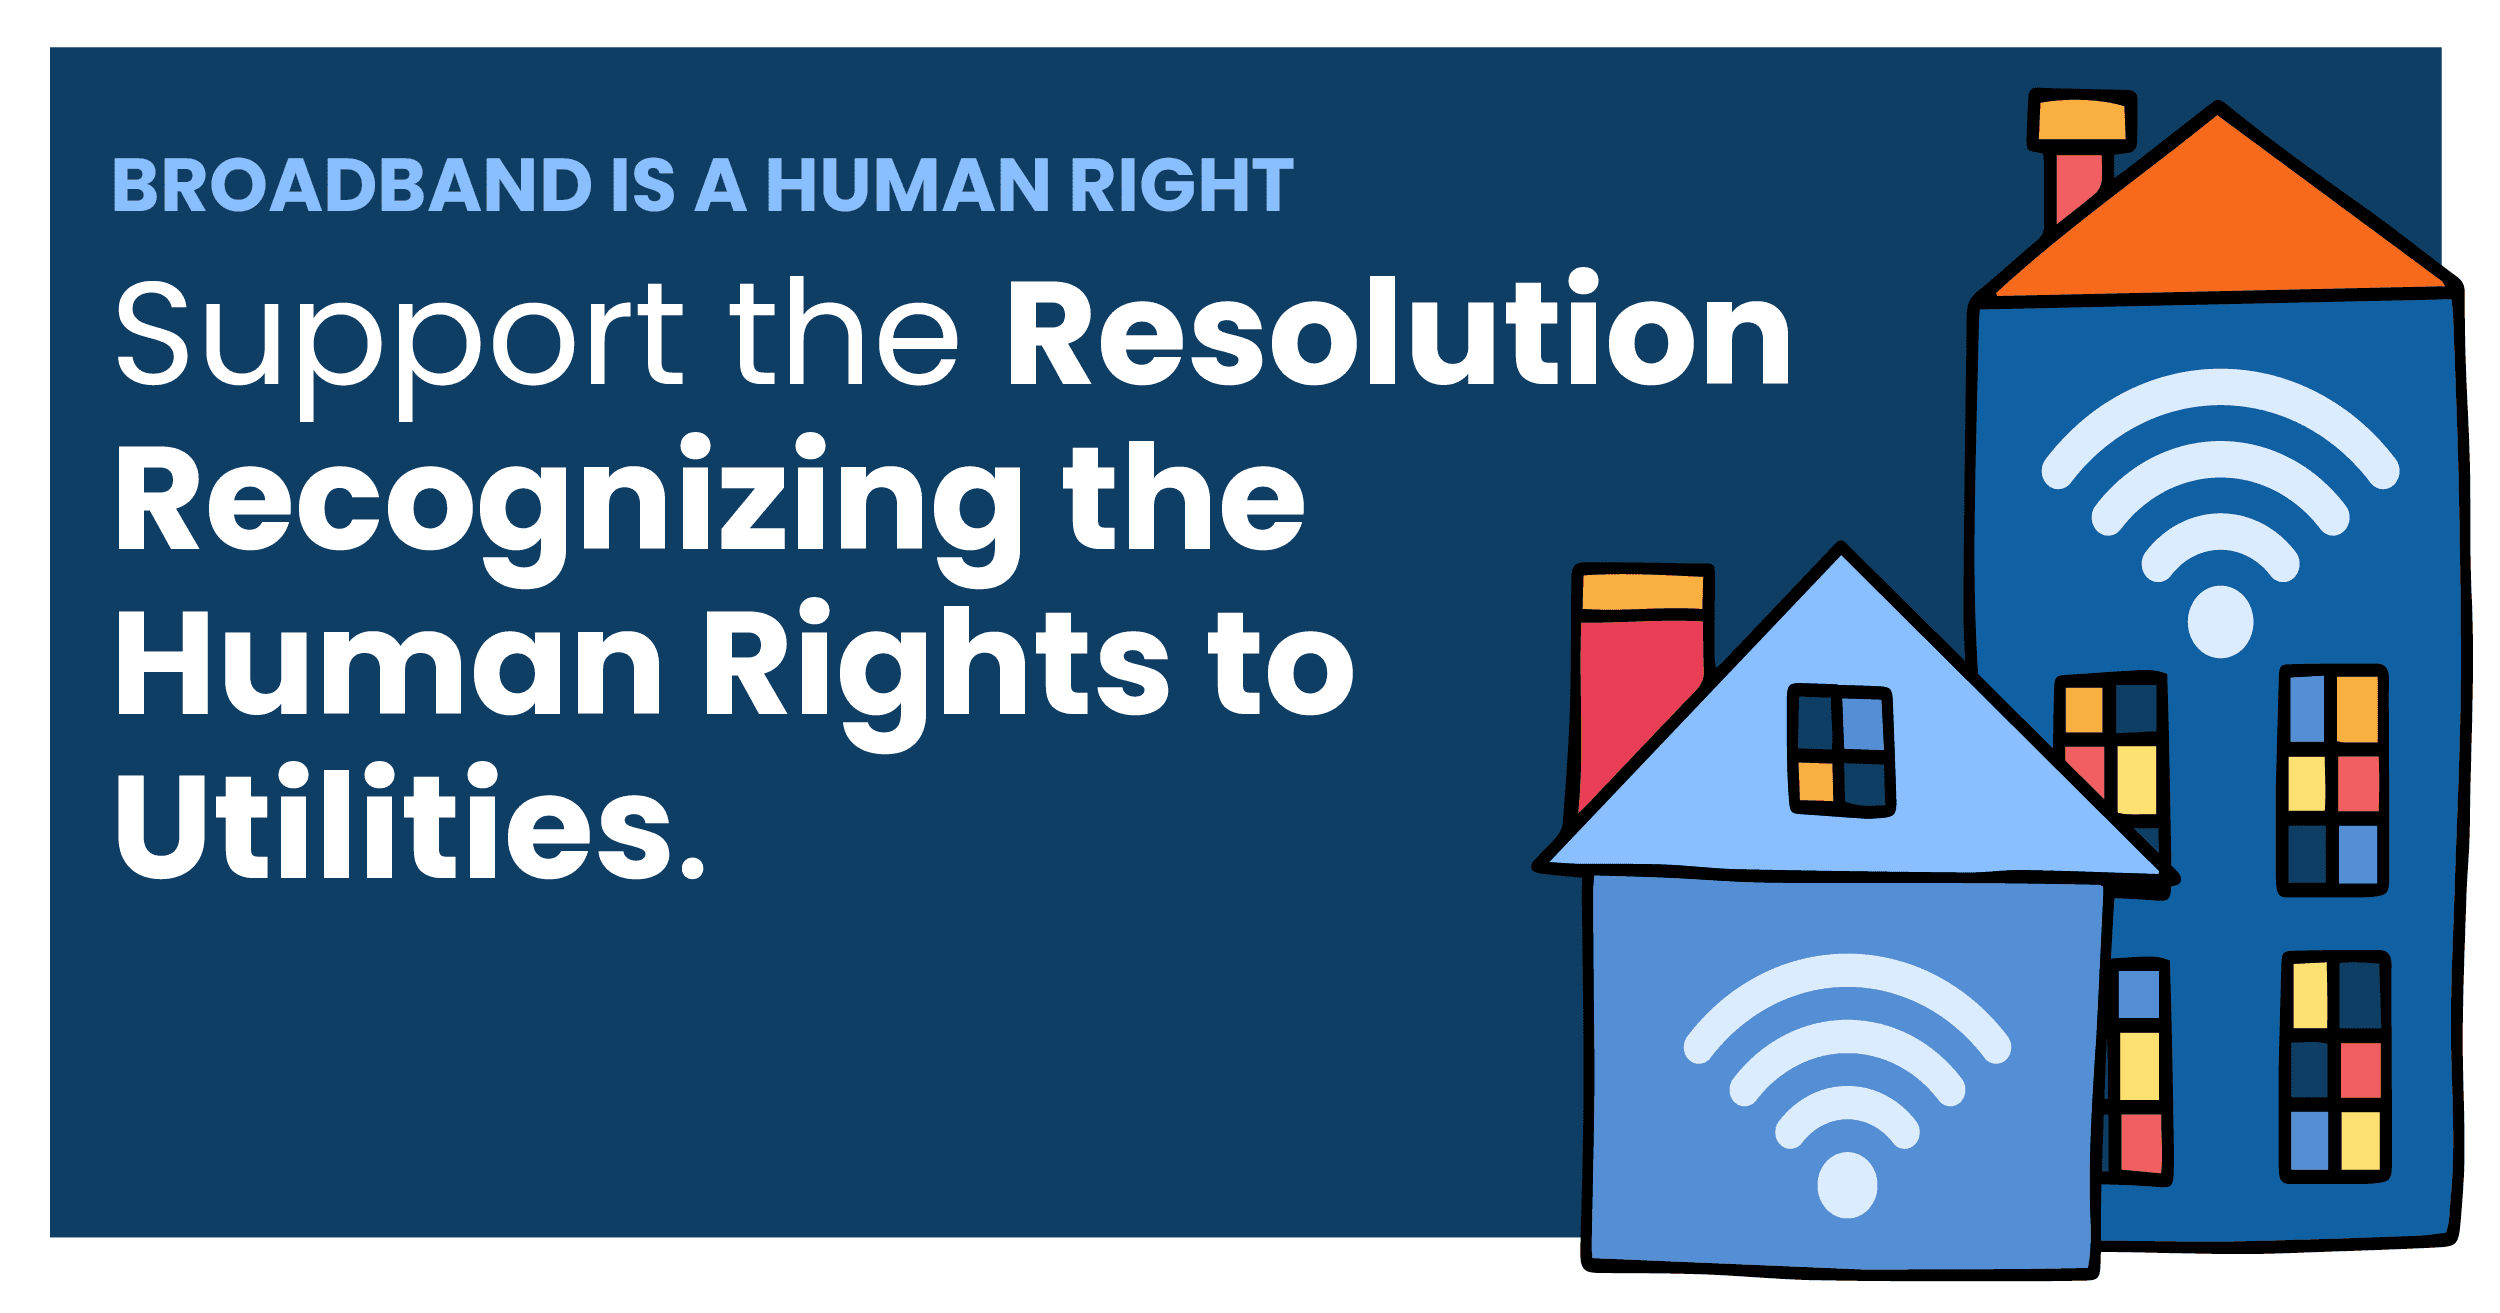 Illustrated buildings with WiFi symbols sit on a blue background. The text reads, "Broadband is a human right. Support the Resolution Recognizing the Human Rights to Utilities."